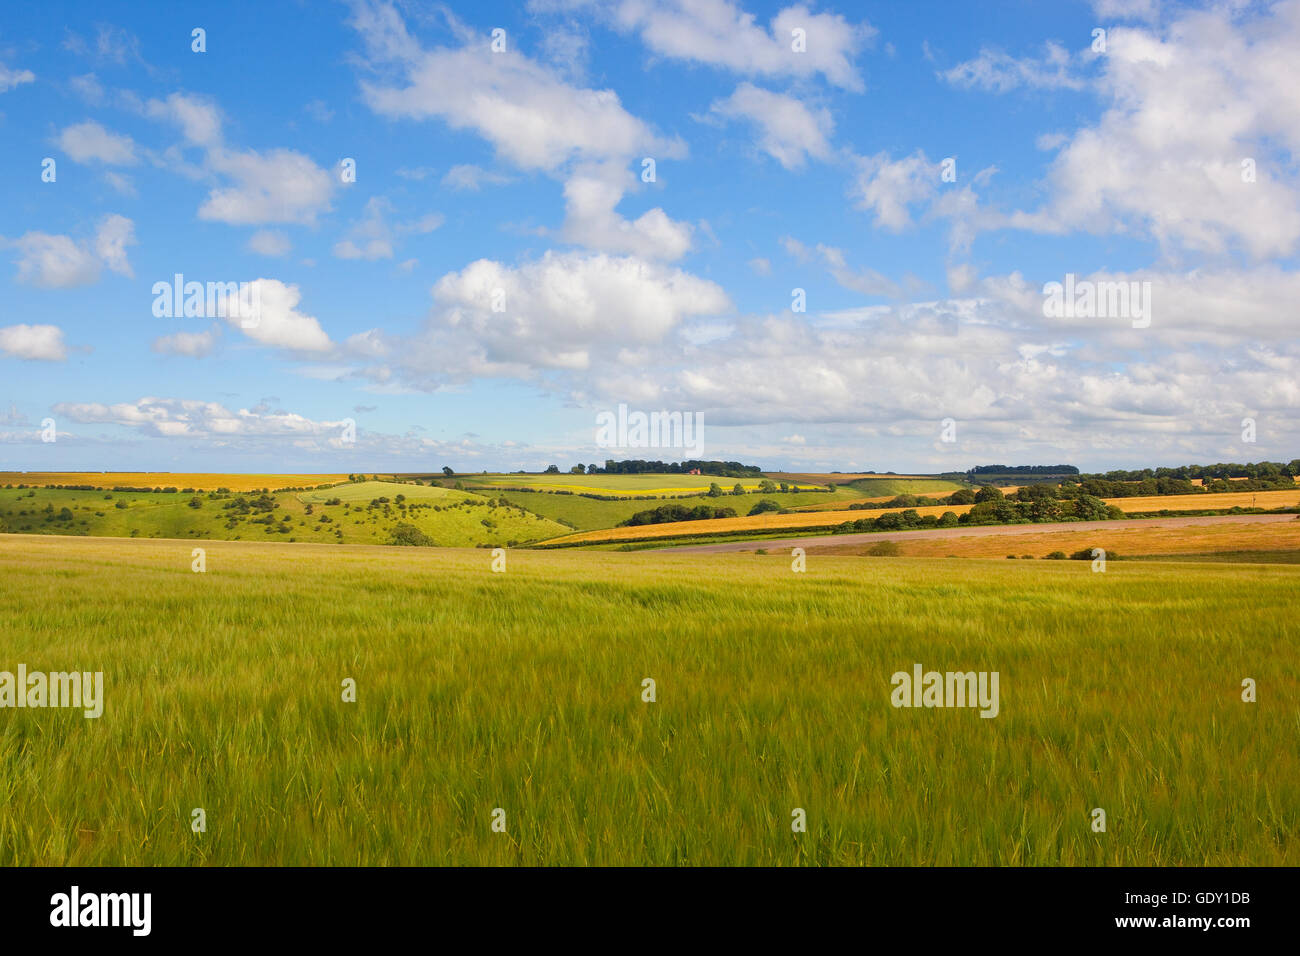 Golden green barley fields with views over the Yorkshire wolds under a blue cloudy sky in summertime. Stock Photo